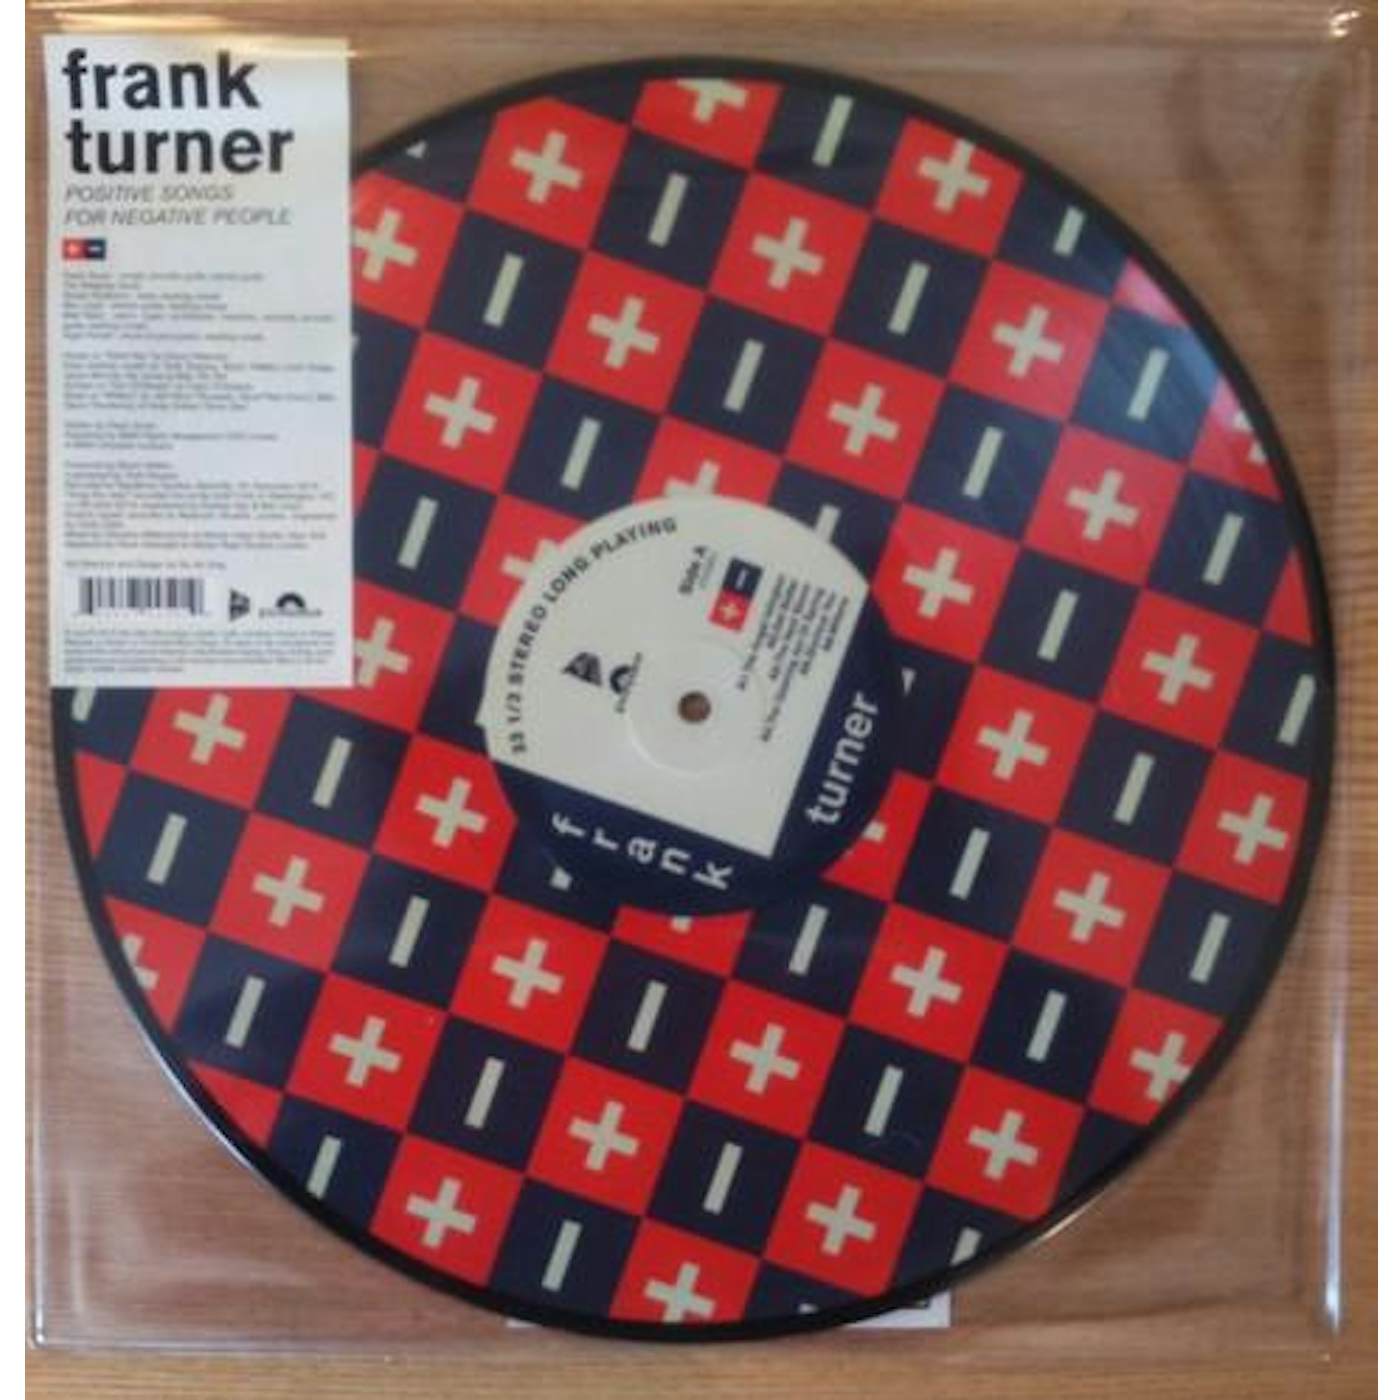 Frank Turner POSITIVE SONGS FOR NEGATIVE PEOPLE (PICTURE DISC) Vinyl Record